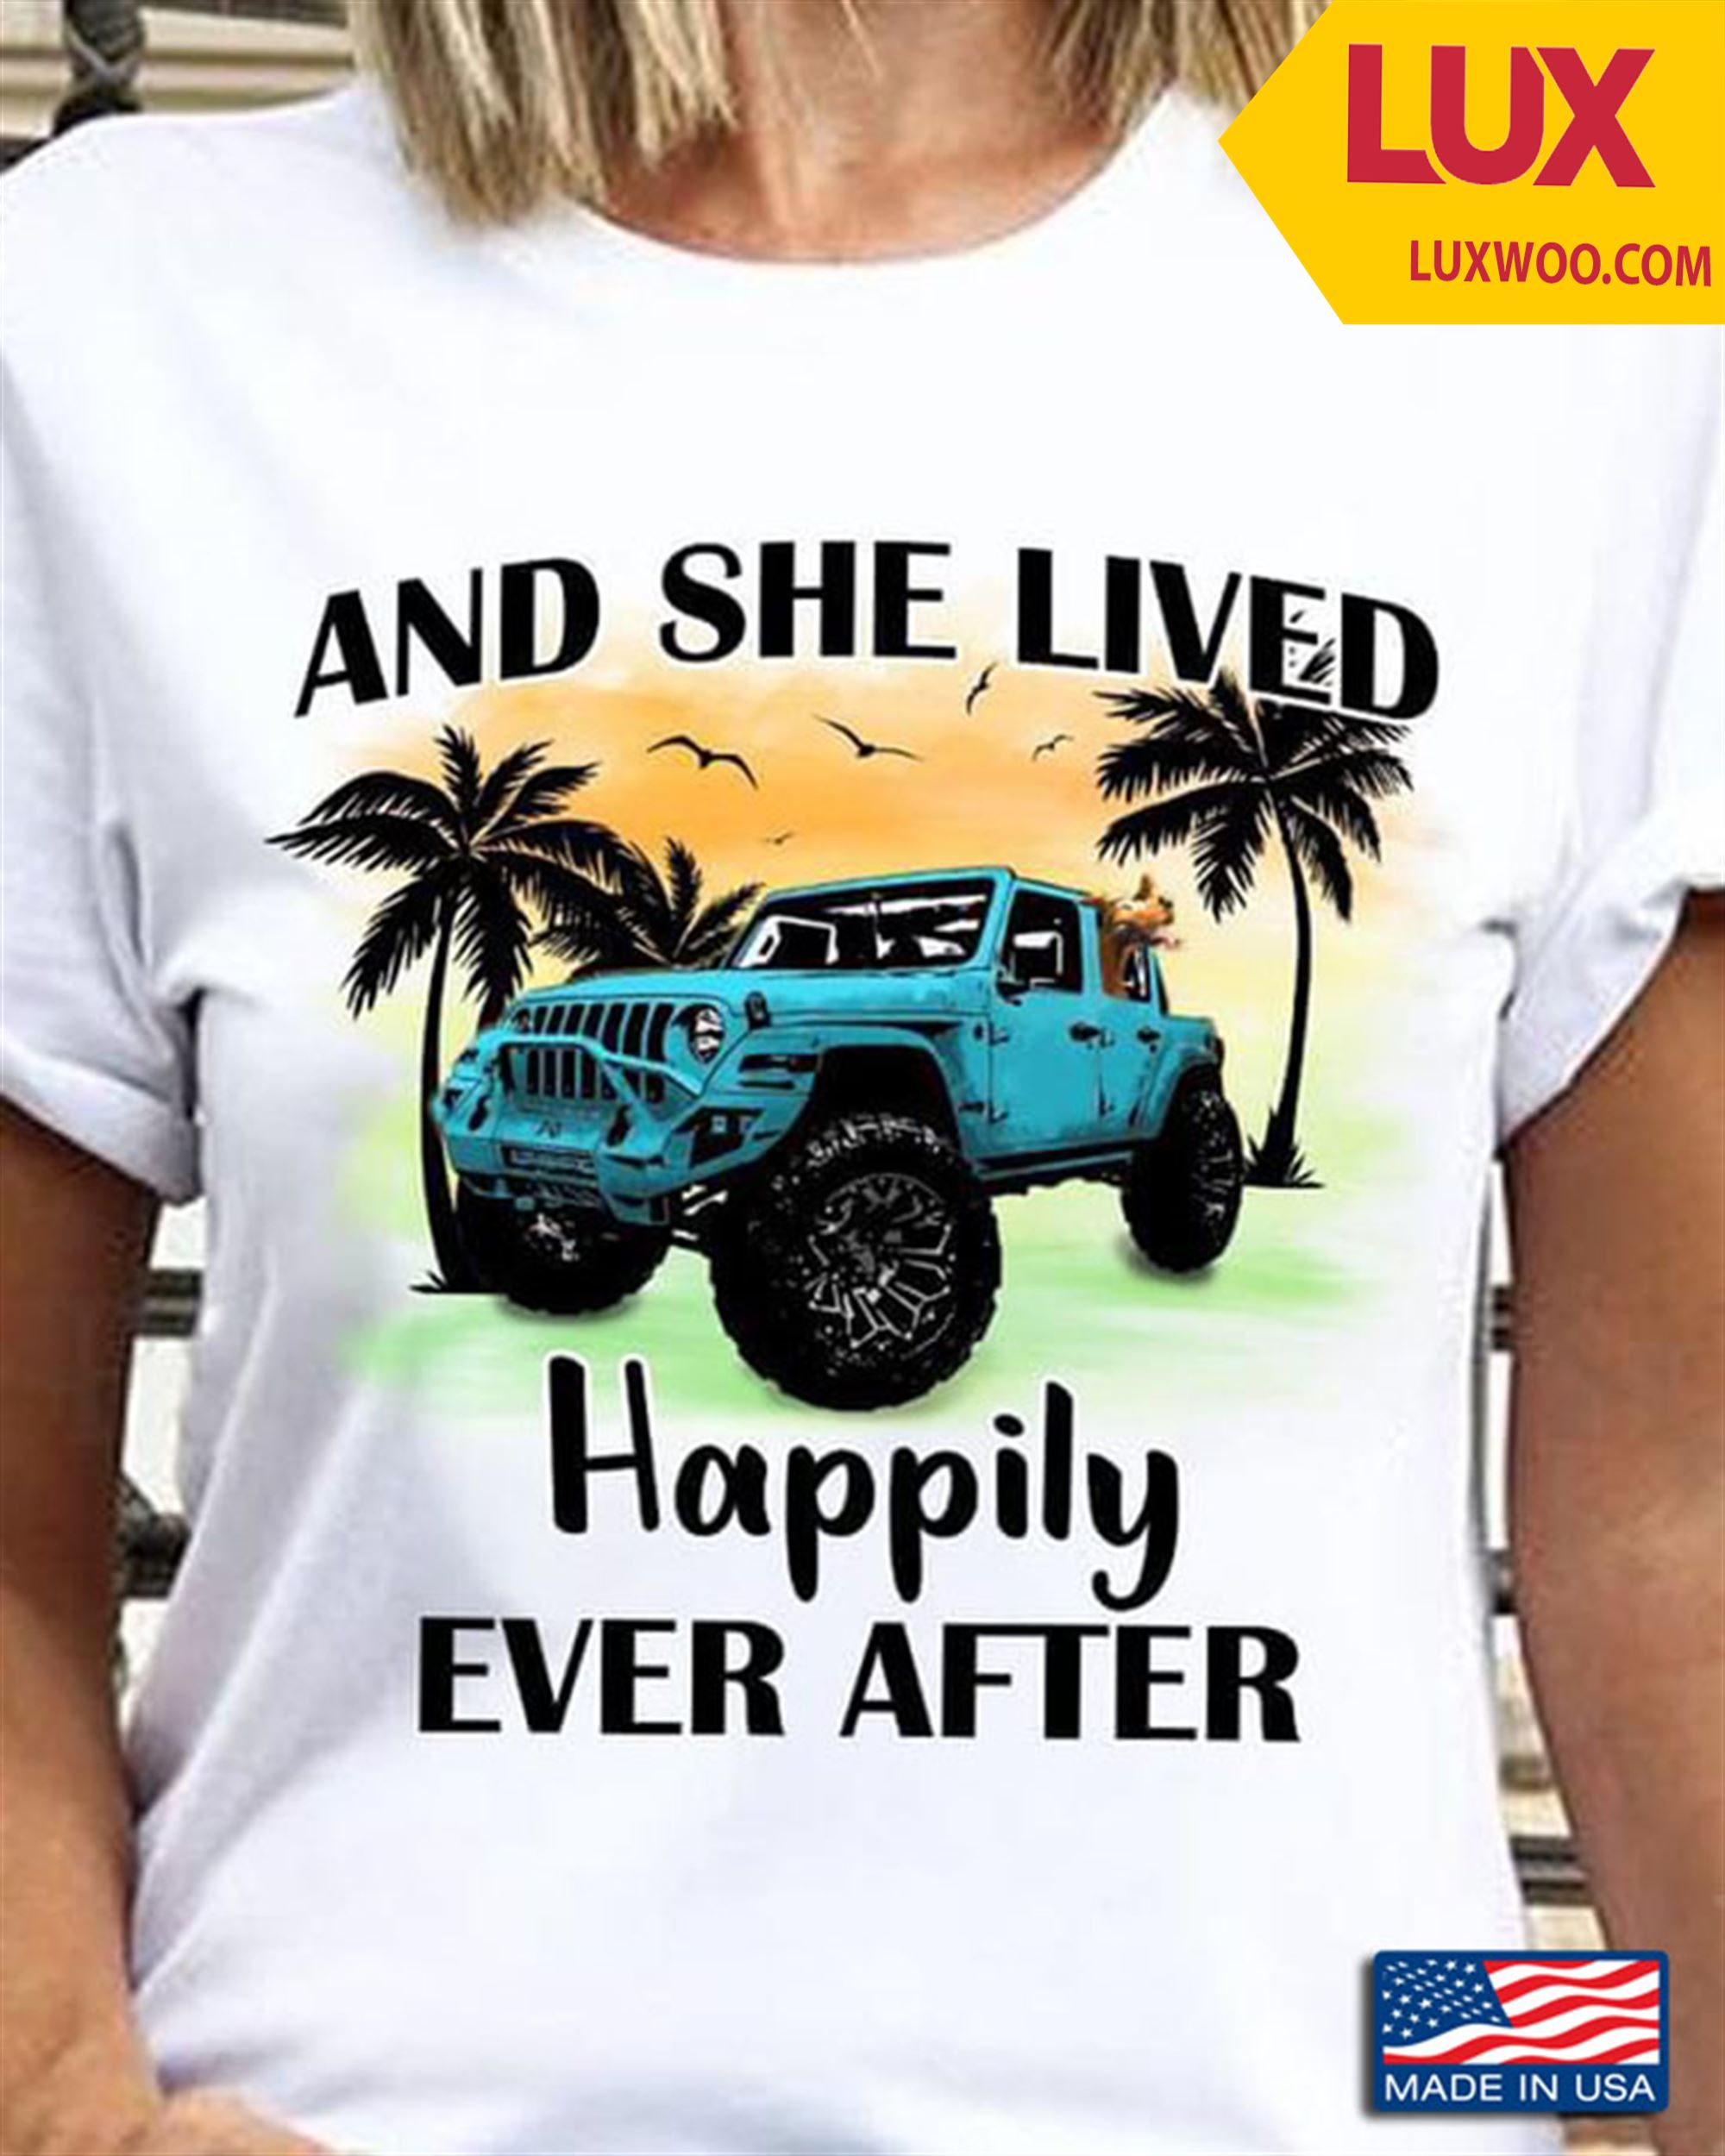 Jeep On Beach And She Lived Happily Ever After Shirt Size Up To 5xl